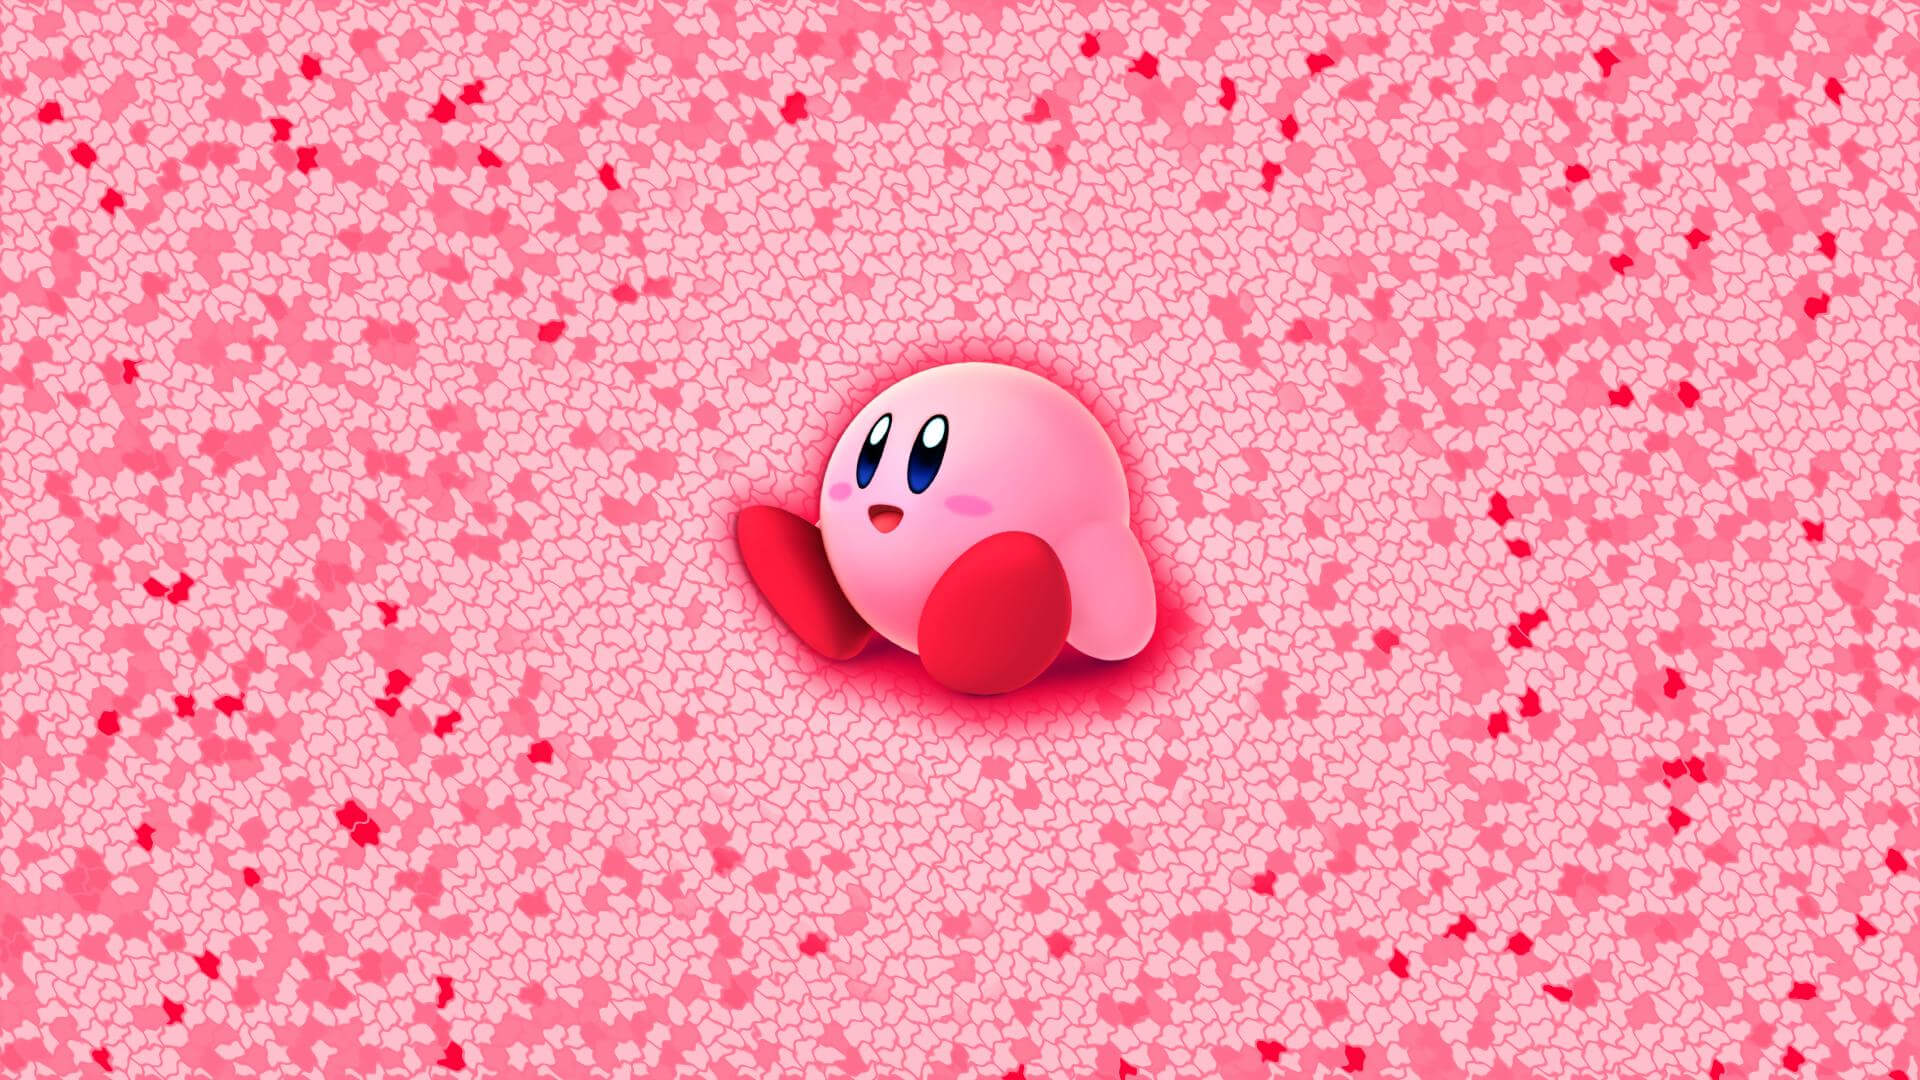 gorgeous kirby picture